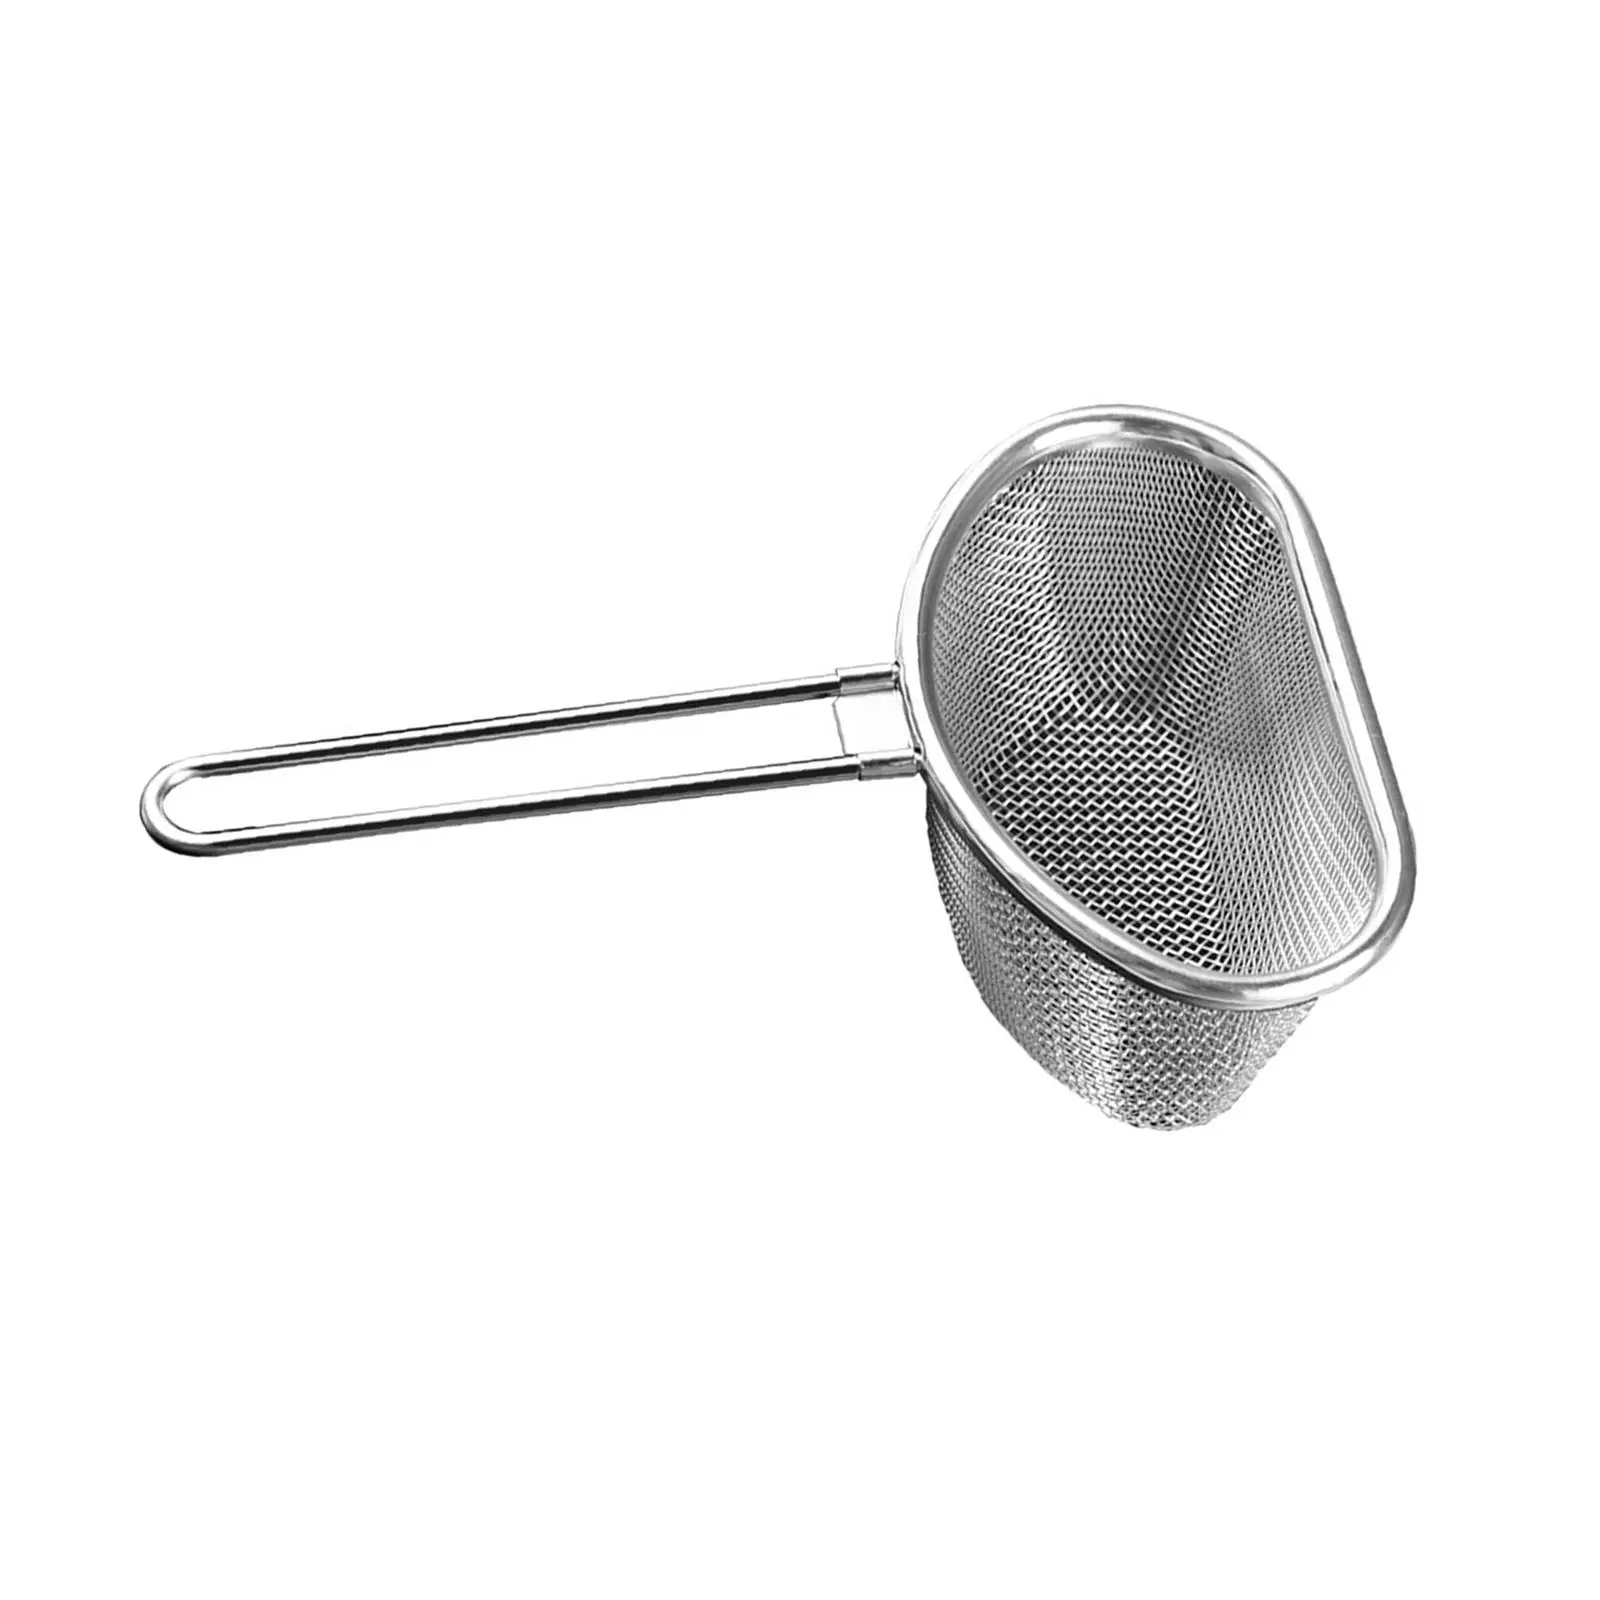 Mesh Strainer Stainless Steel Fry Basket Filter Mesh Sieve Noodle Strainer for Frying noodles Kitchen Home Accessory